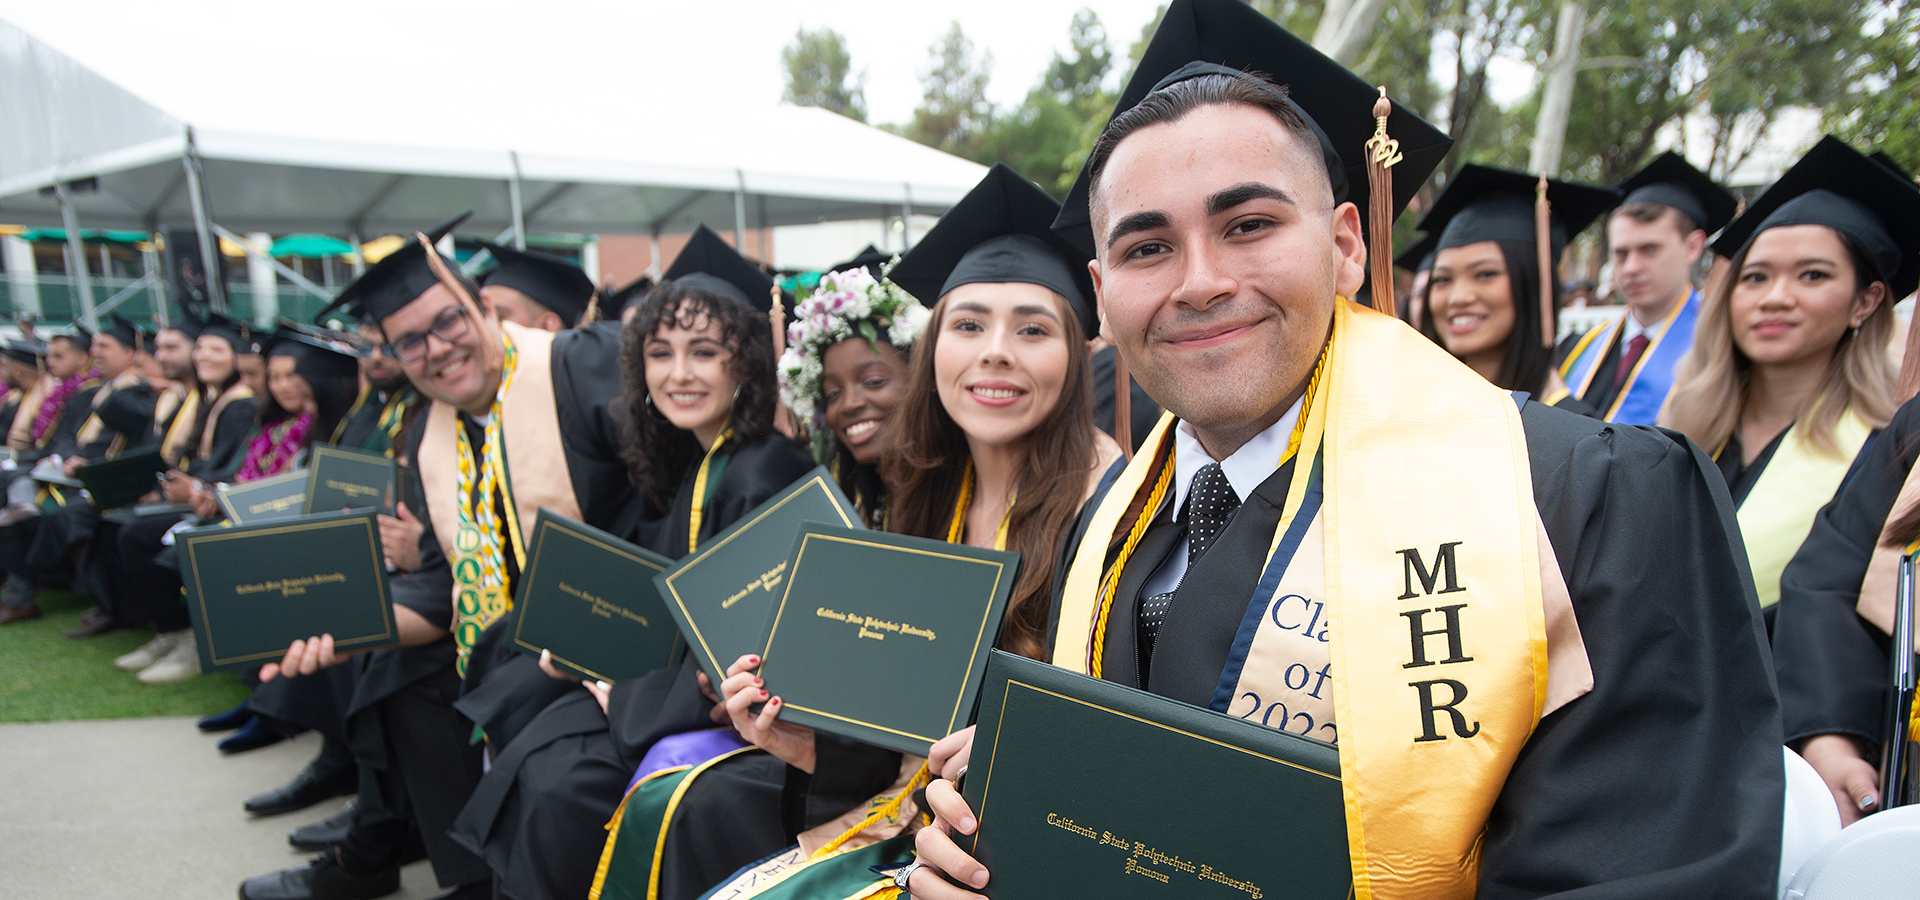 A group of male and female graduates smile during the 2022 College of Business commencement ceremony.